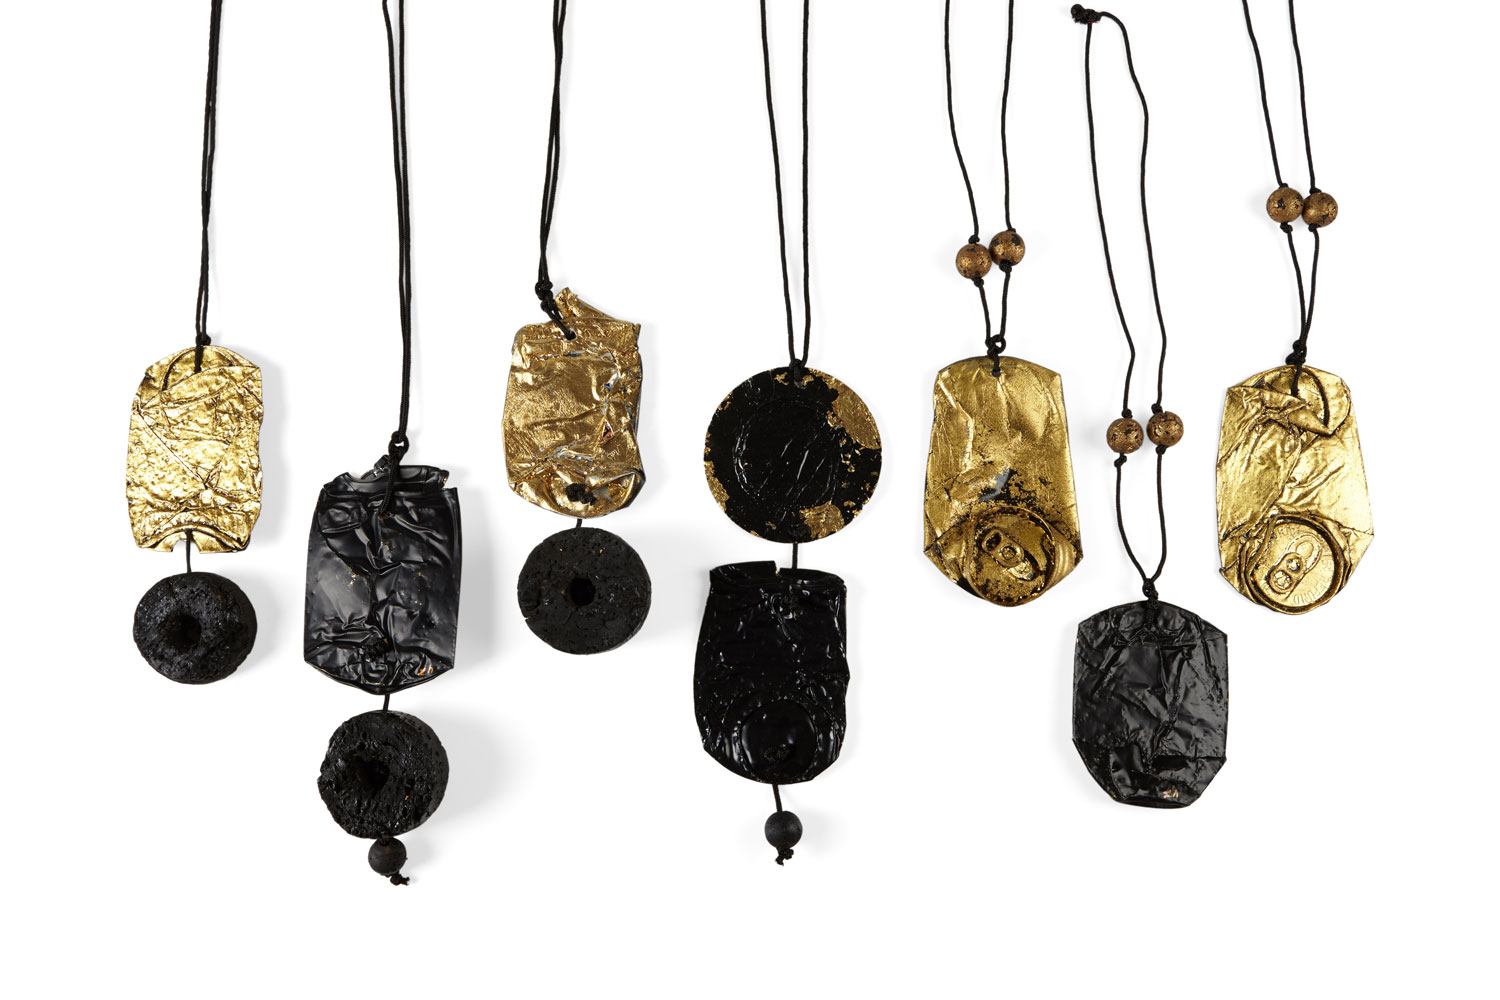 Seven pendant necklaces assembled from crushed tin cans and fishing floats, which were part of Nevelson’s costume designs for Orfeo ed Euridice, Opera Theatre of St Louis, 1984.